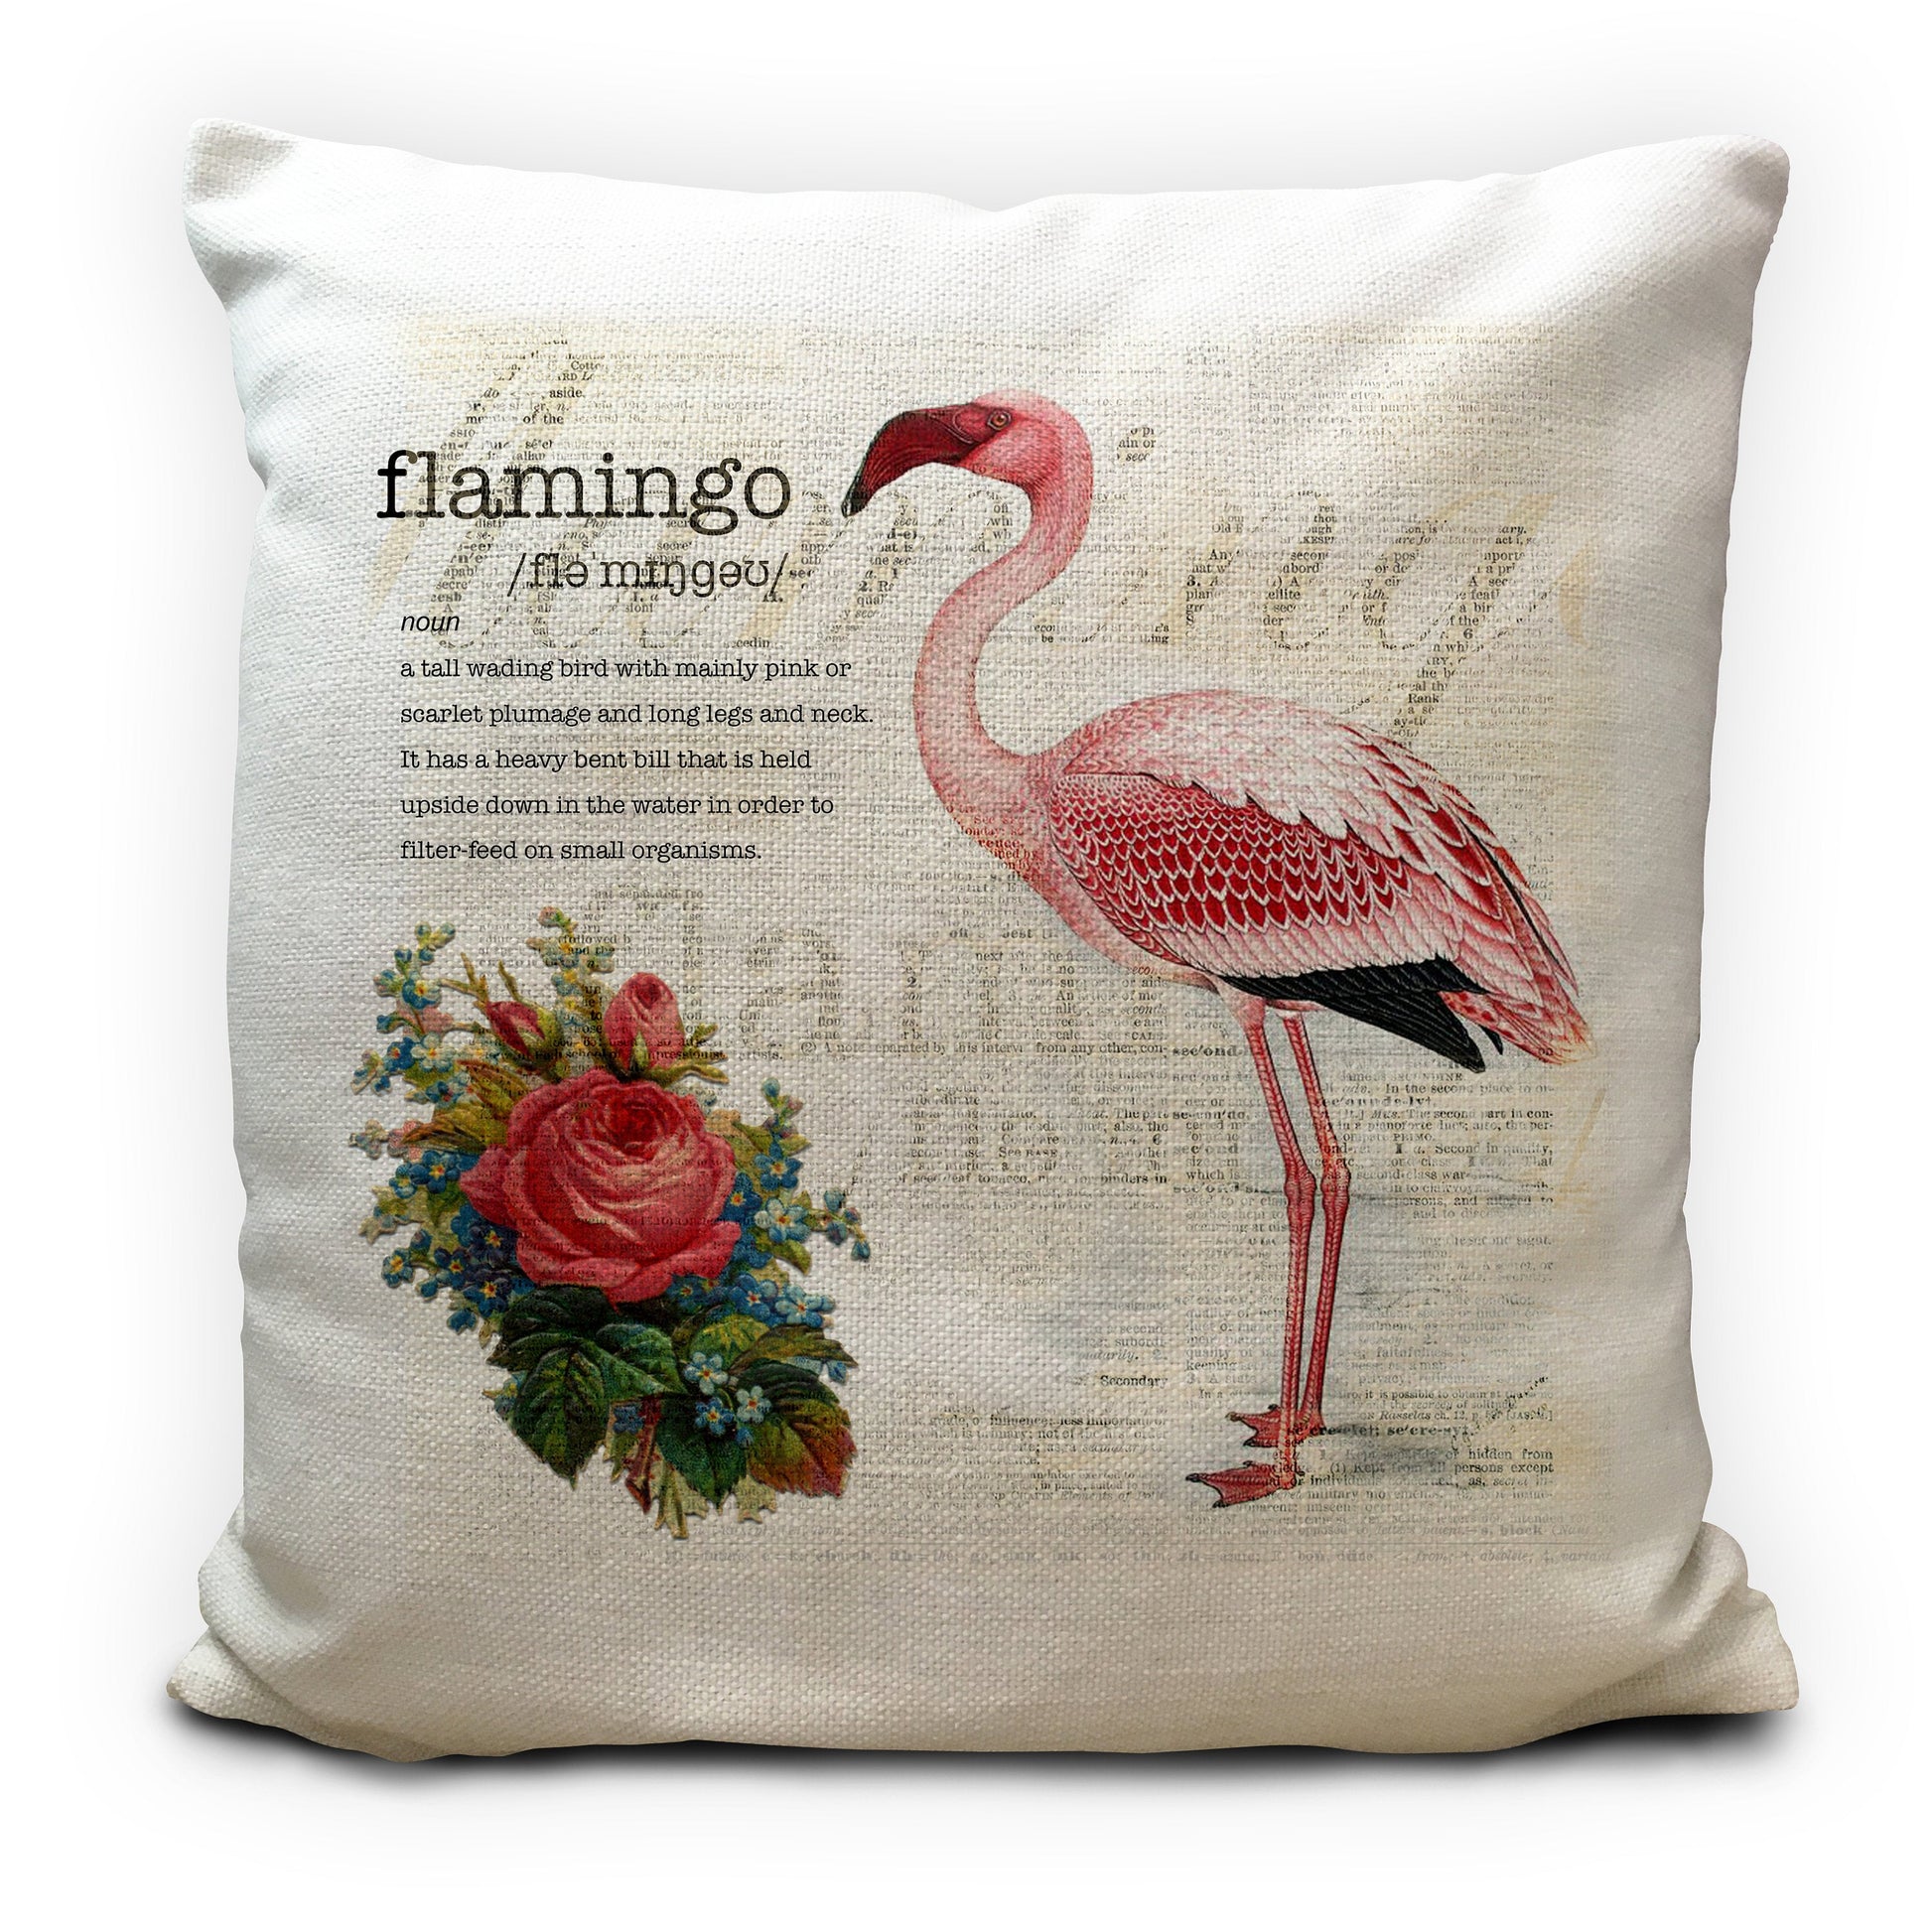 flamingo cushion cover with traditional art and dictionary description